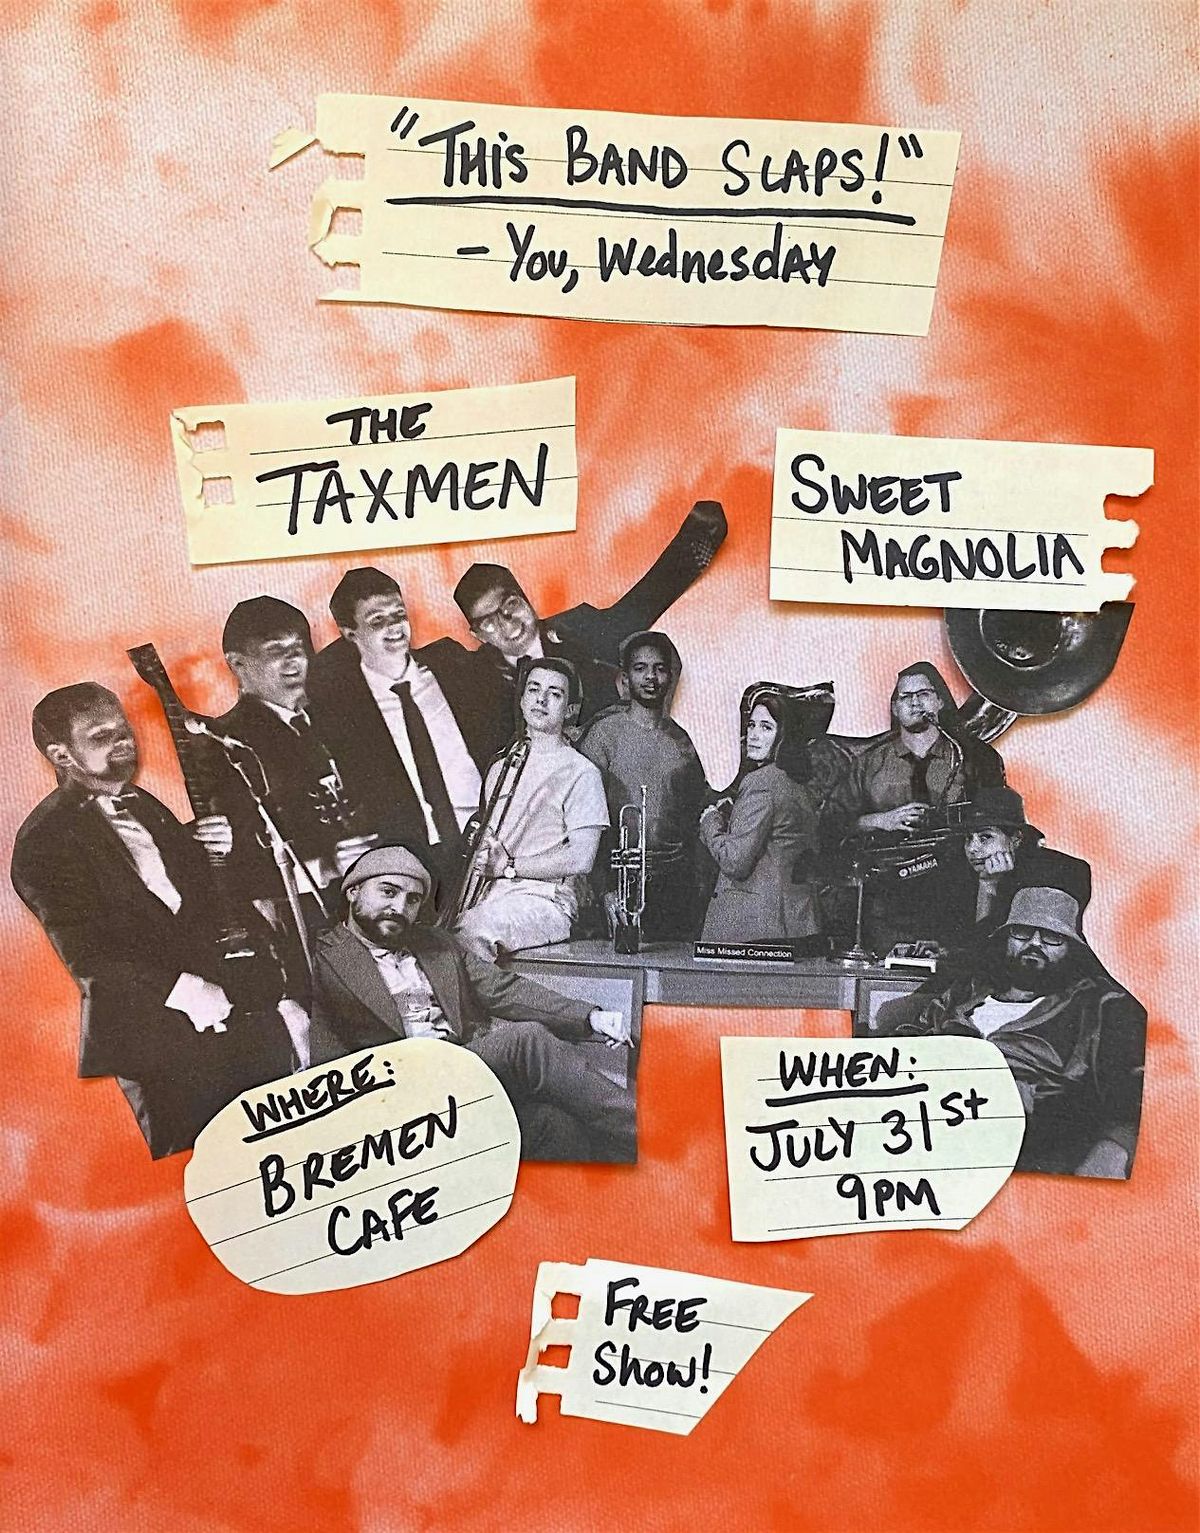 New Orleans's Sweet Magnolia at Bremen Caf\u00e9 with the Taxmen -- Free Show!